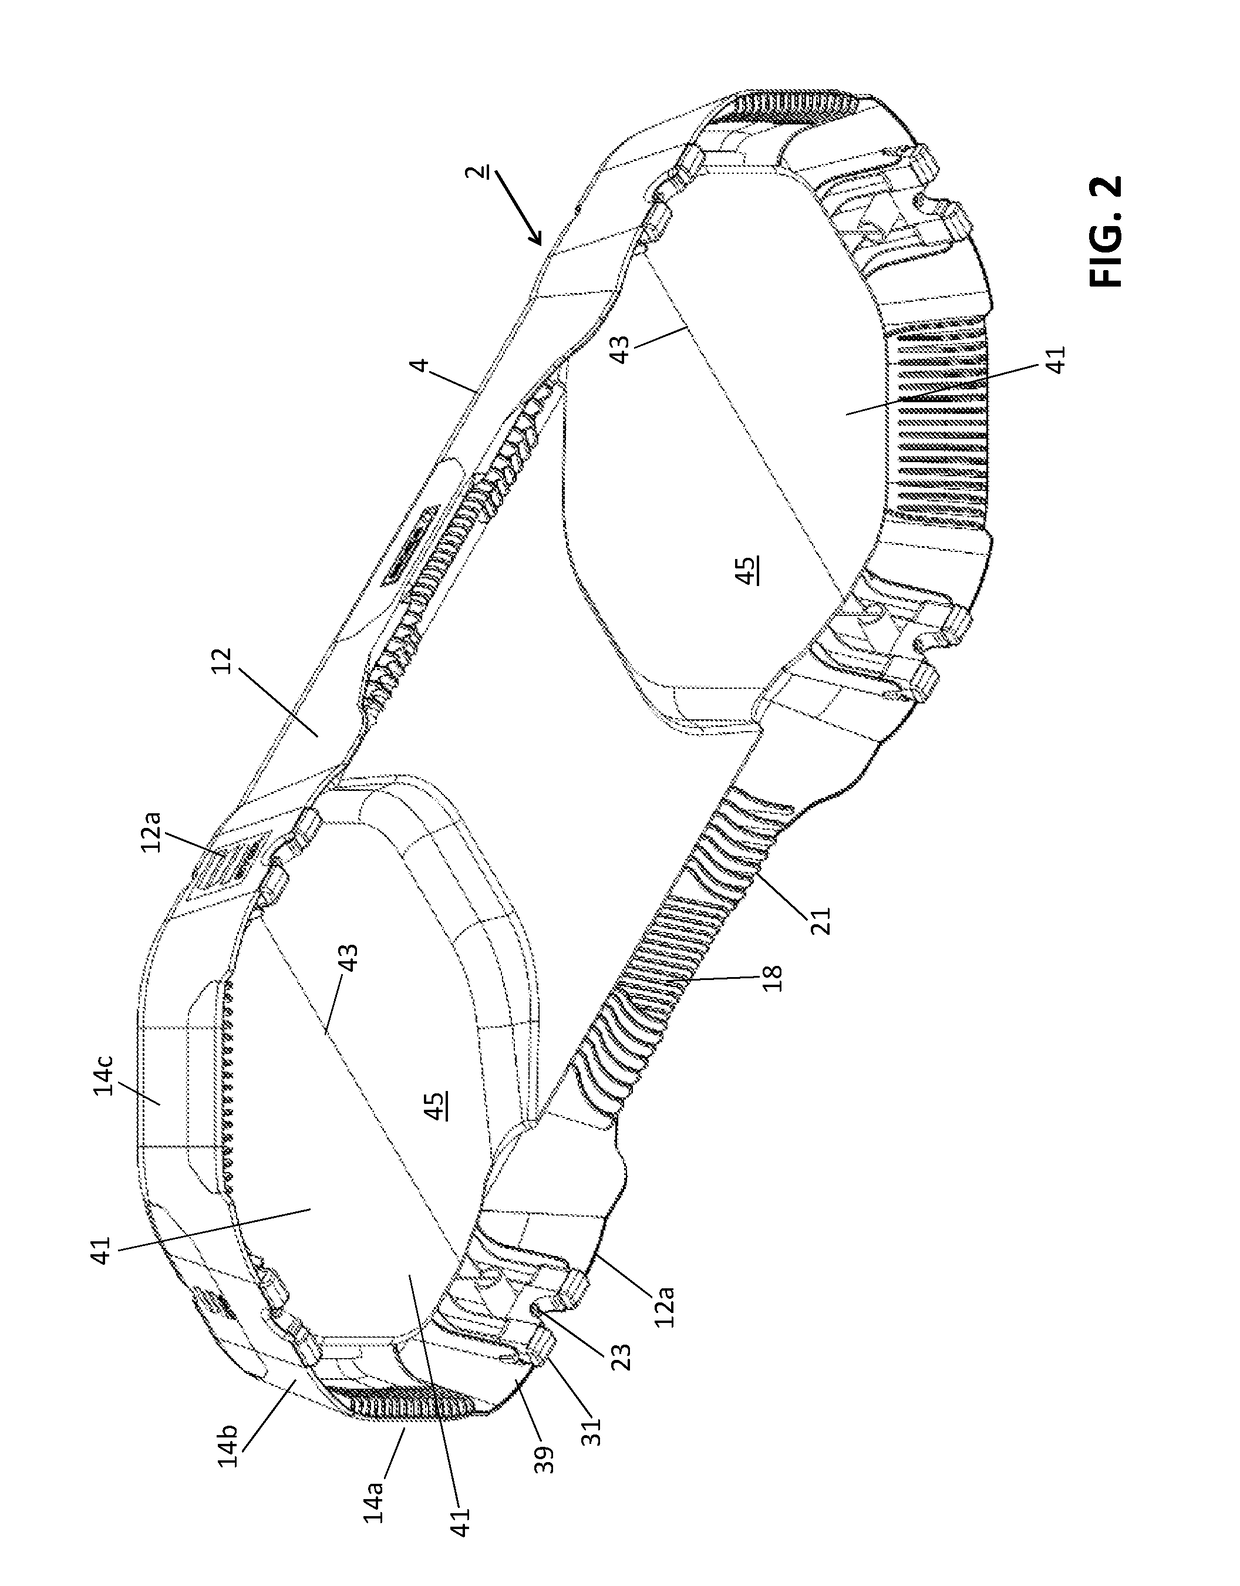 Exercise Apparatus Including An Adjustable Support Platform